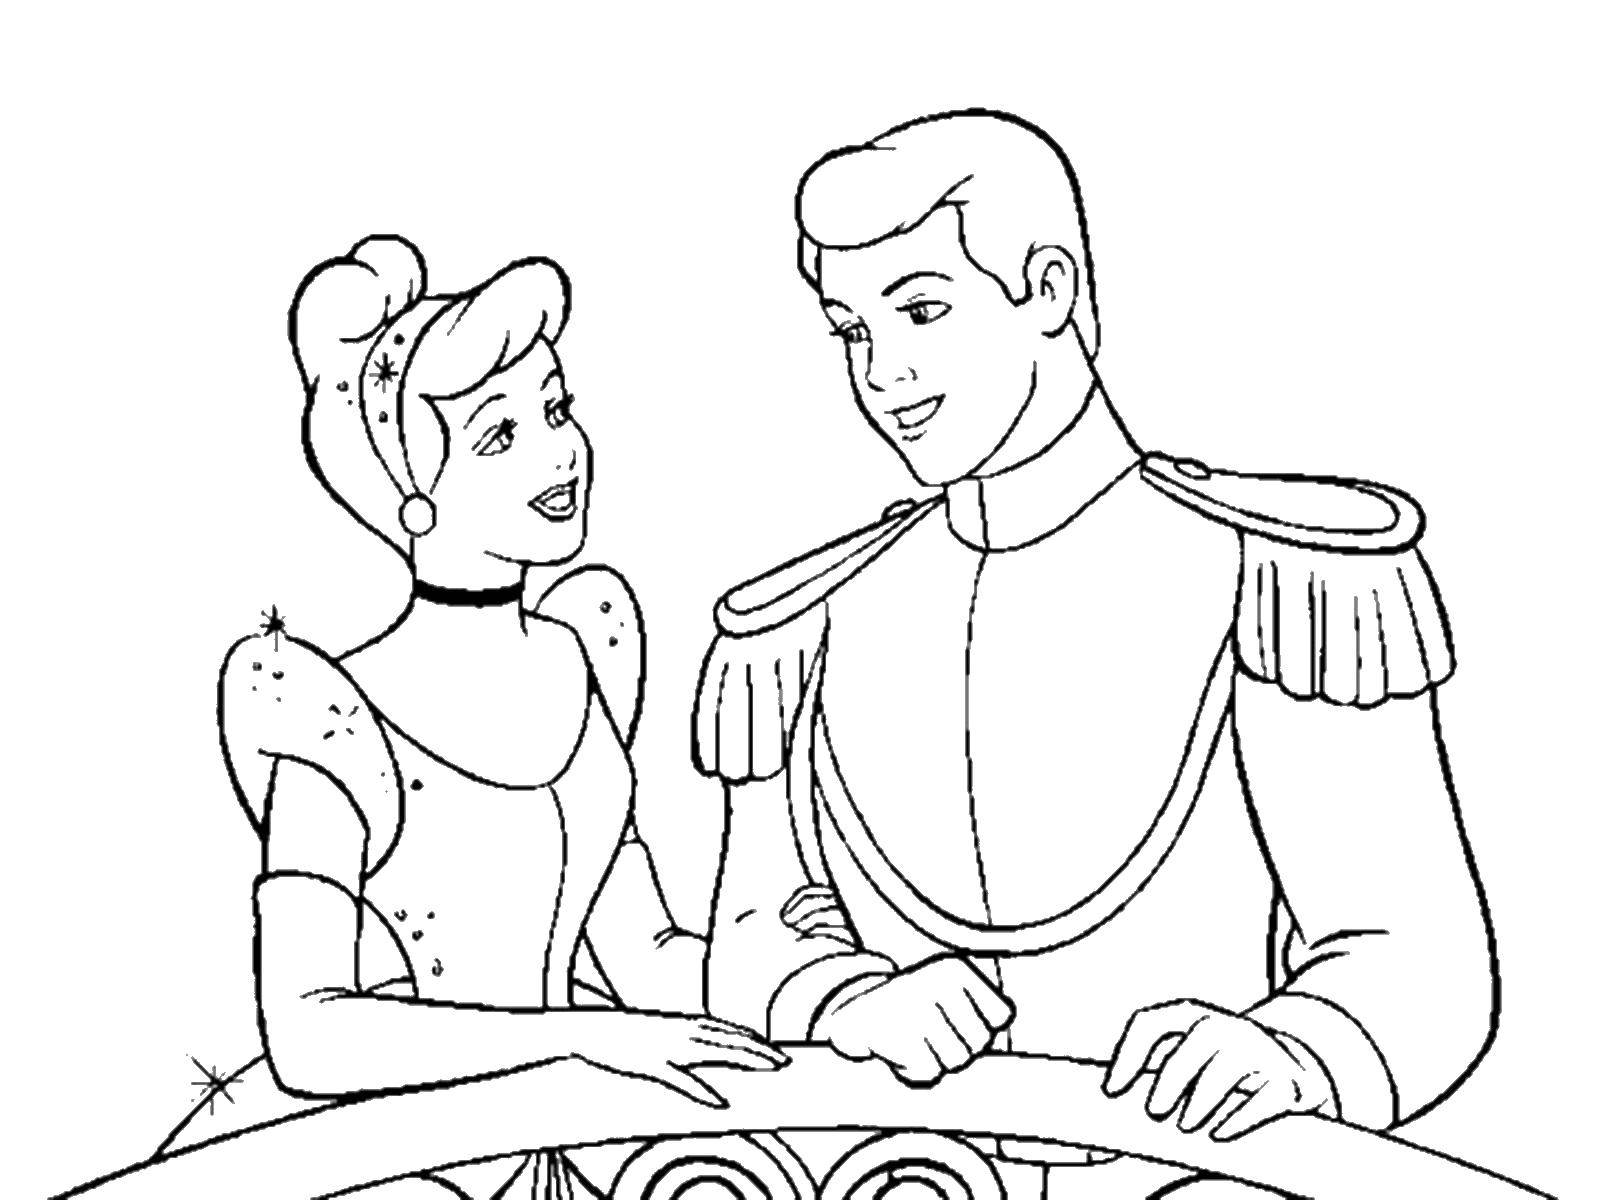 Coloring Cinderella and the Prince at the ball. Category Cinderella. Tags:  Cinderella, slipper.